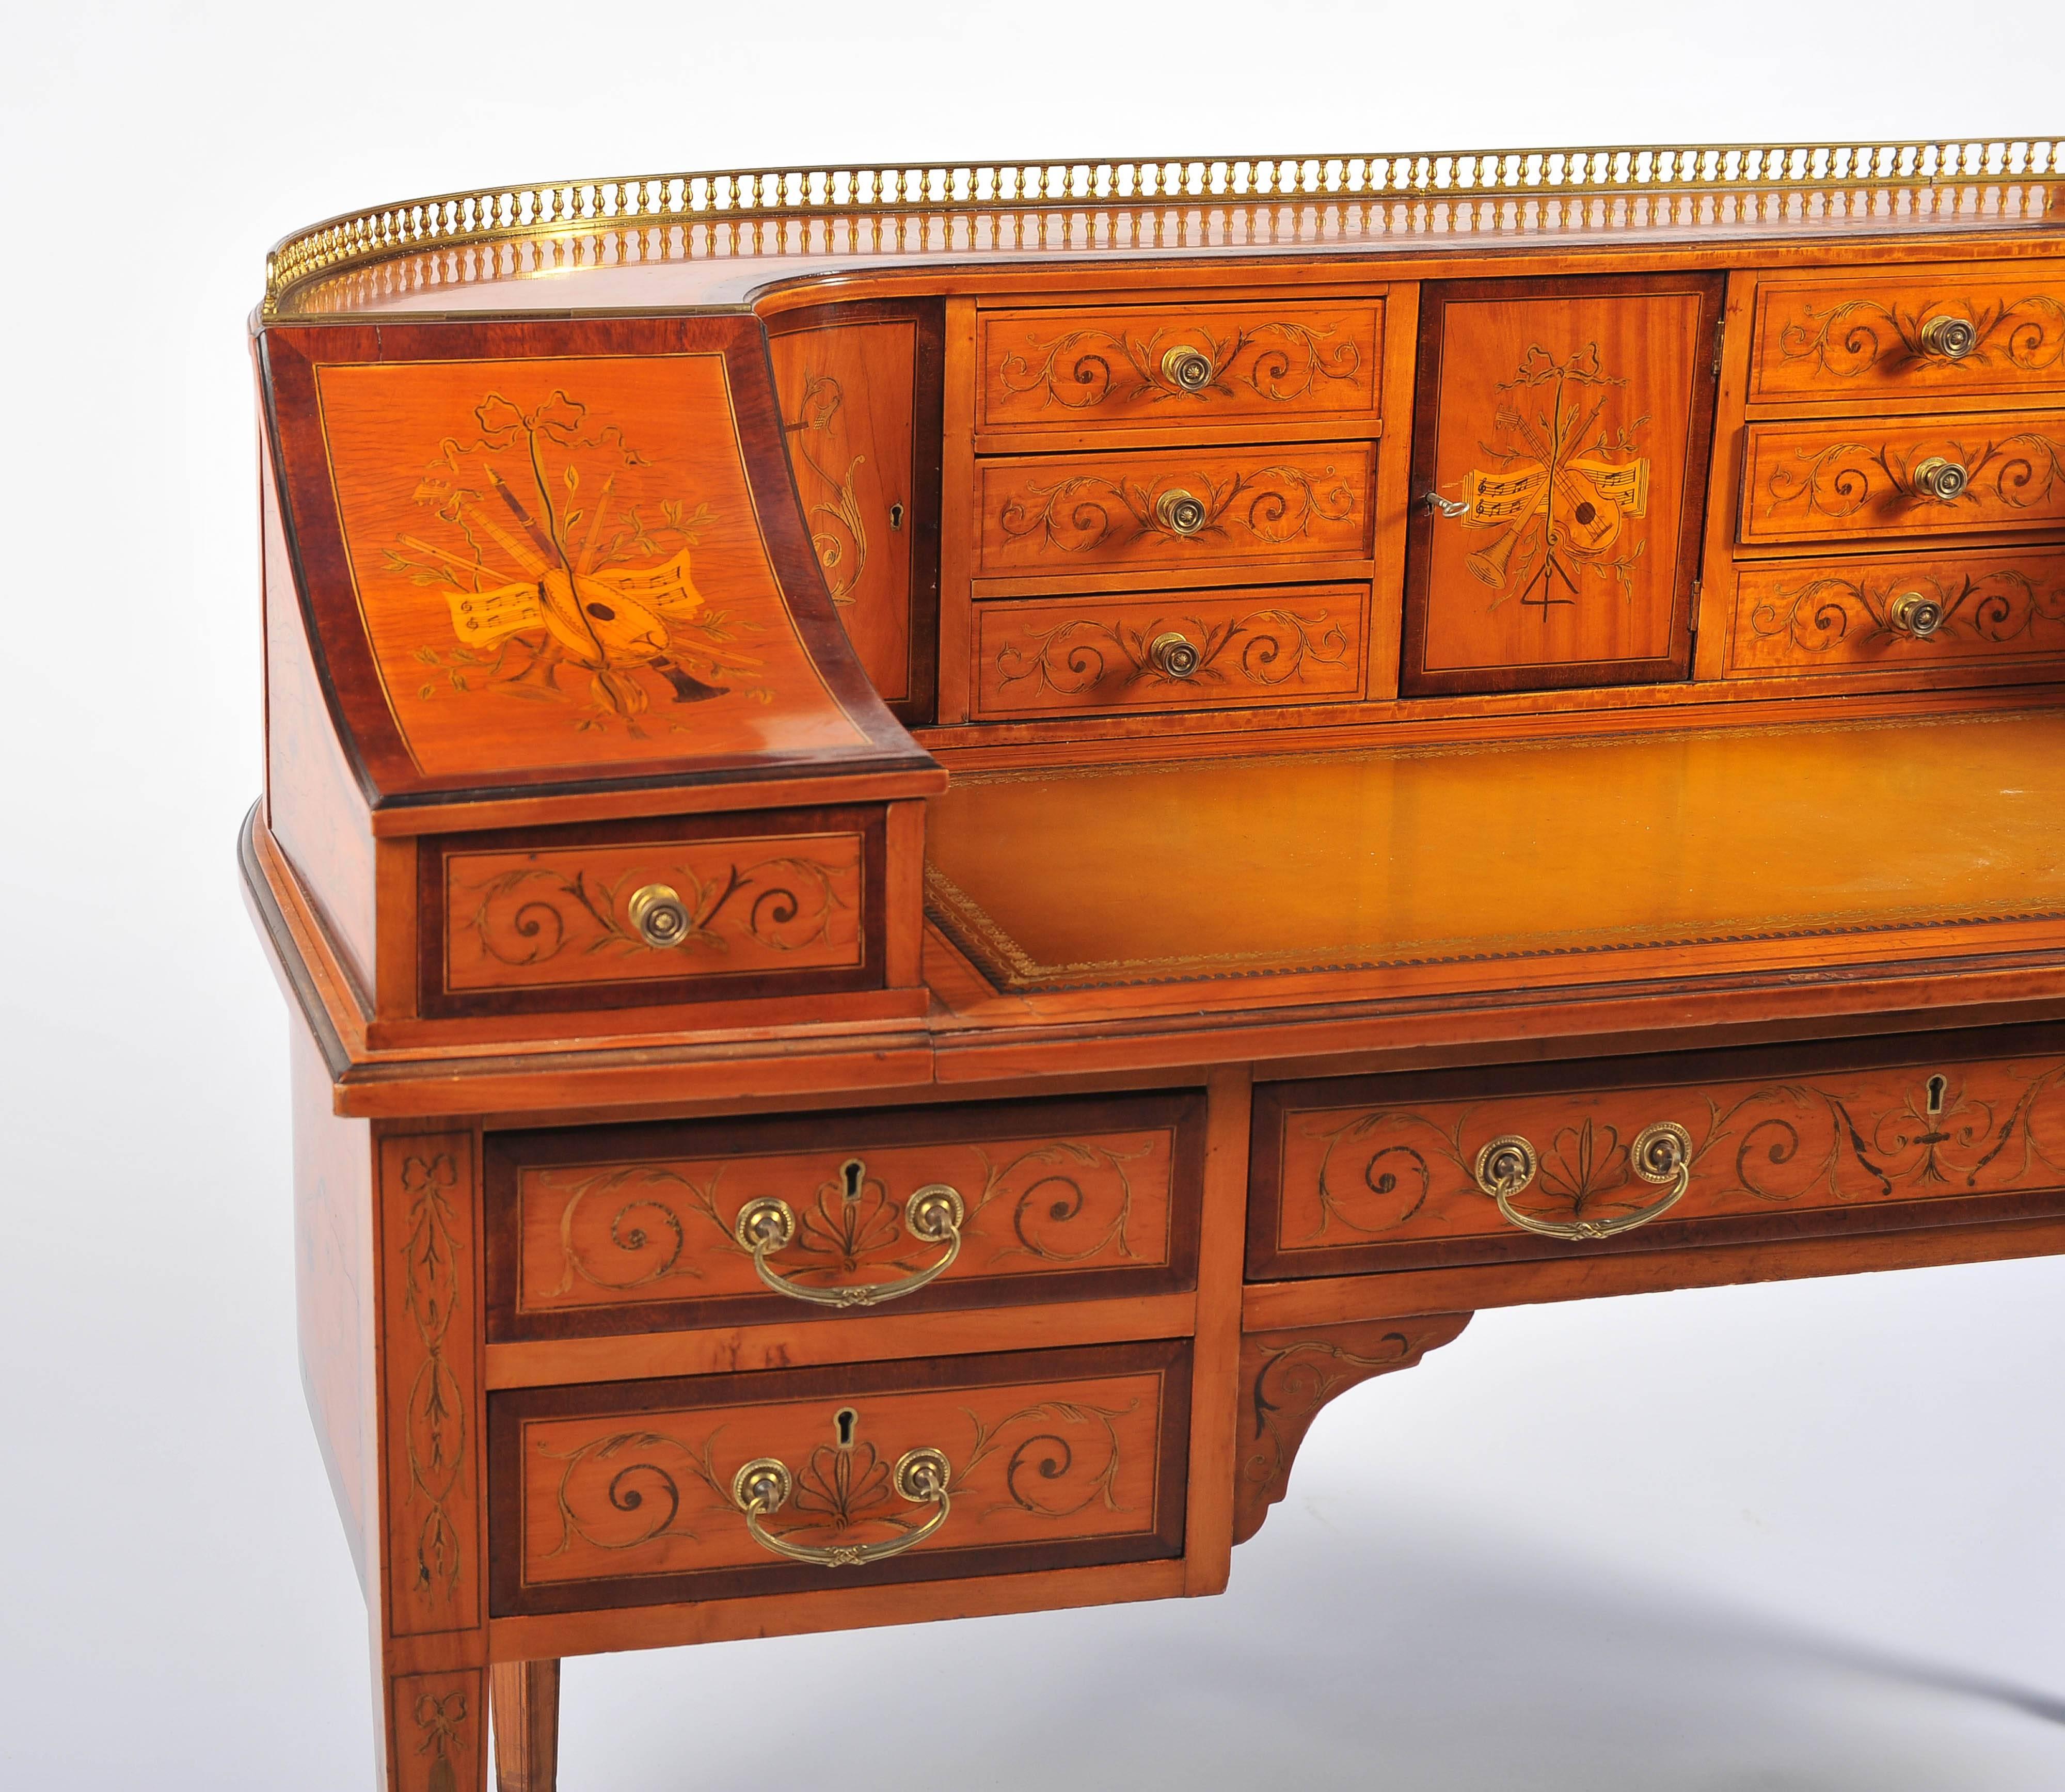 A very good quality Edwardian period Sheraton style Satinwood, Carlton house desk. Having a brass pierced gallery to the top. Marquetry inlaid decoration depicting musical instruments. Drawers and cupboards each with Rosewood crossbanding. An inset